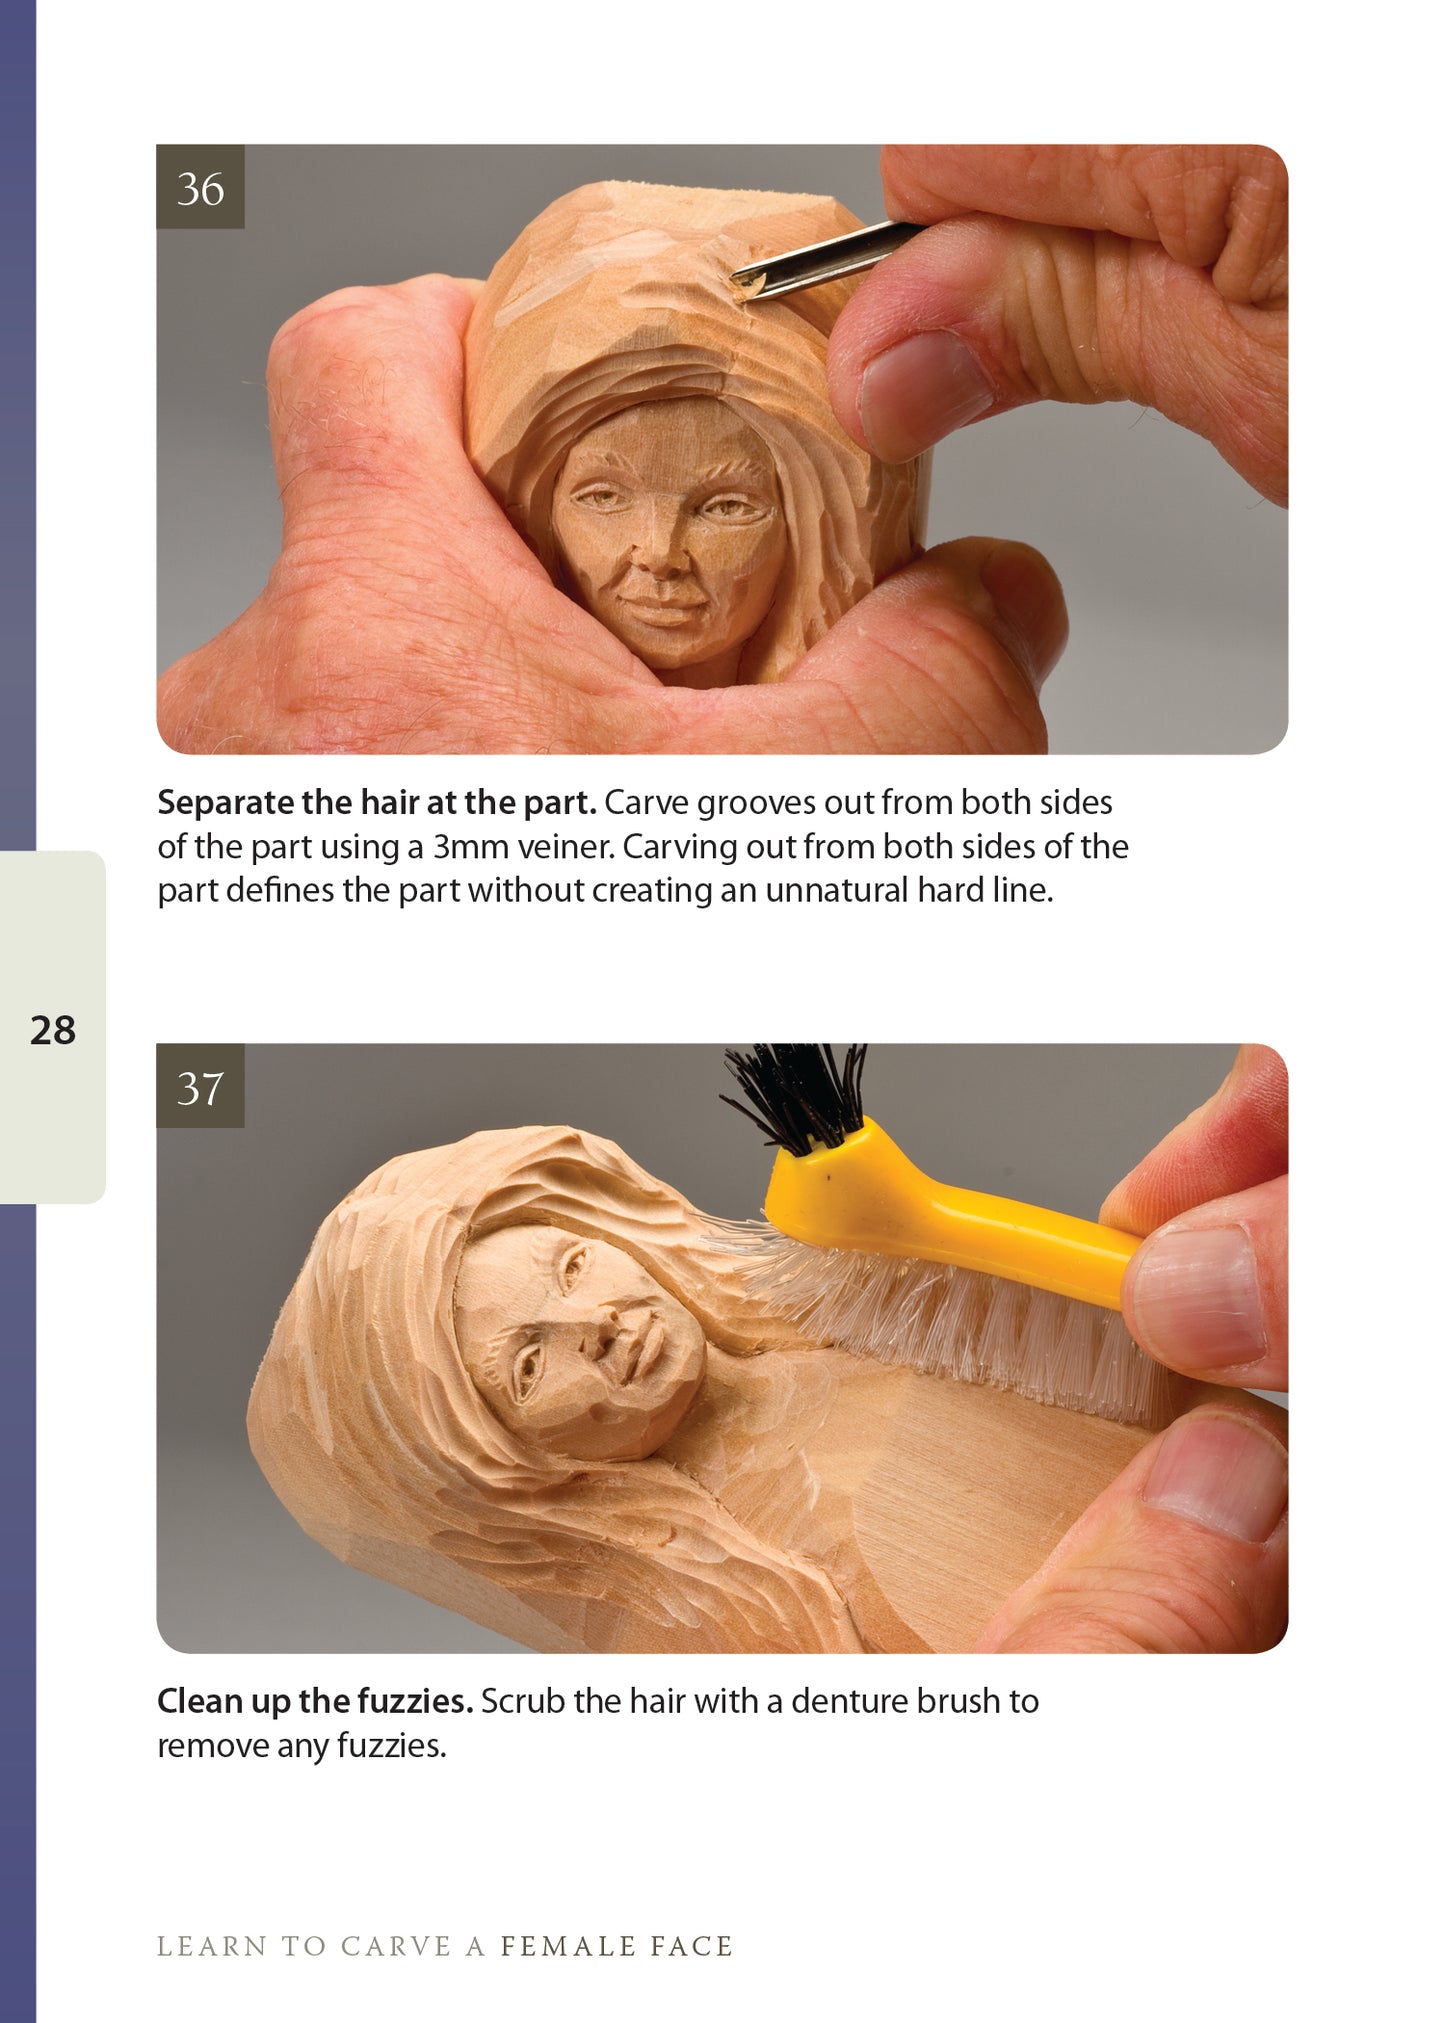 Learn to Carve a Female Face (Booklet)